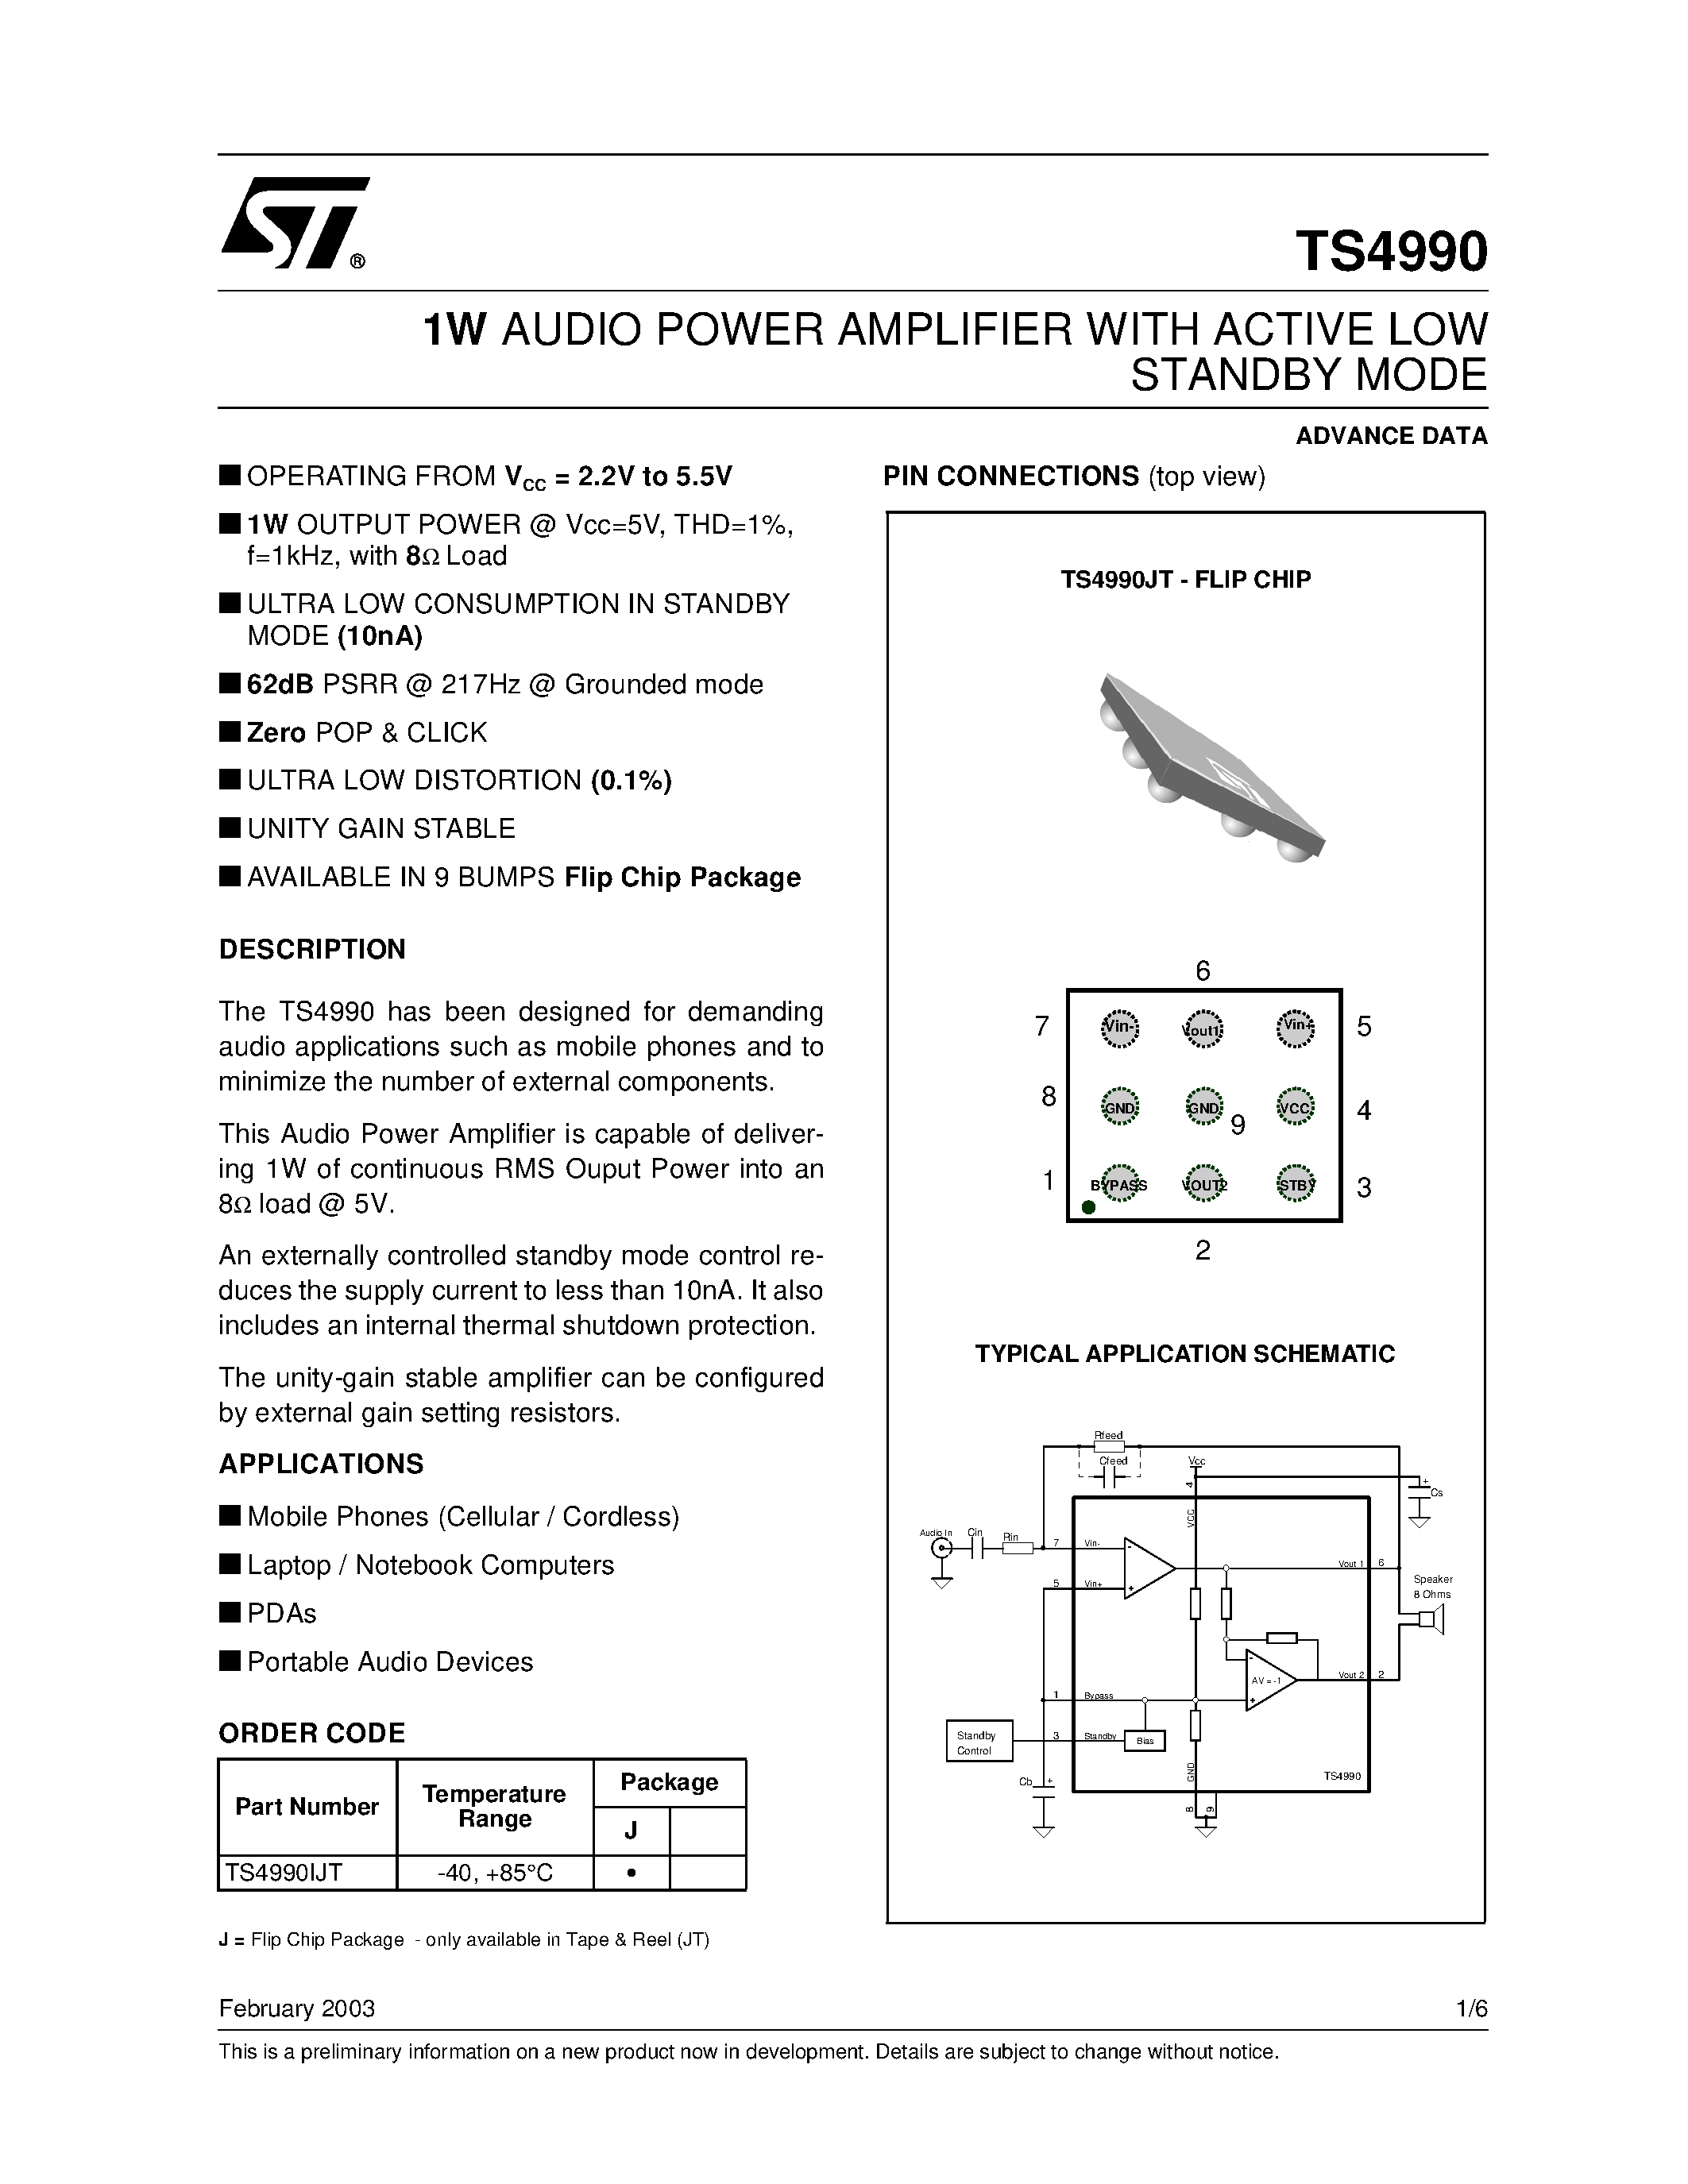 Datasheet TS4990 - 1W AUDIO POWER AMPLIFIER WITH ACTIVE LOW STANDBY MODE page 1